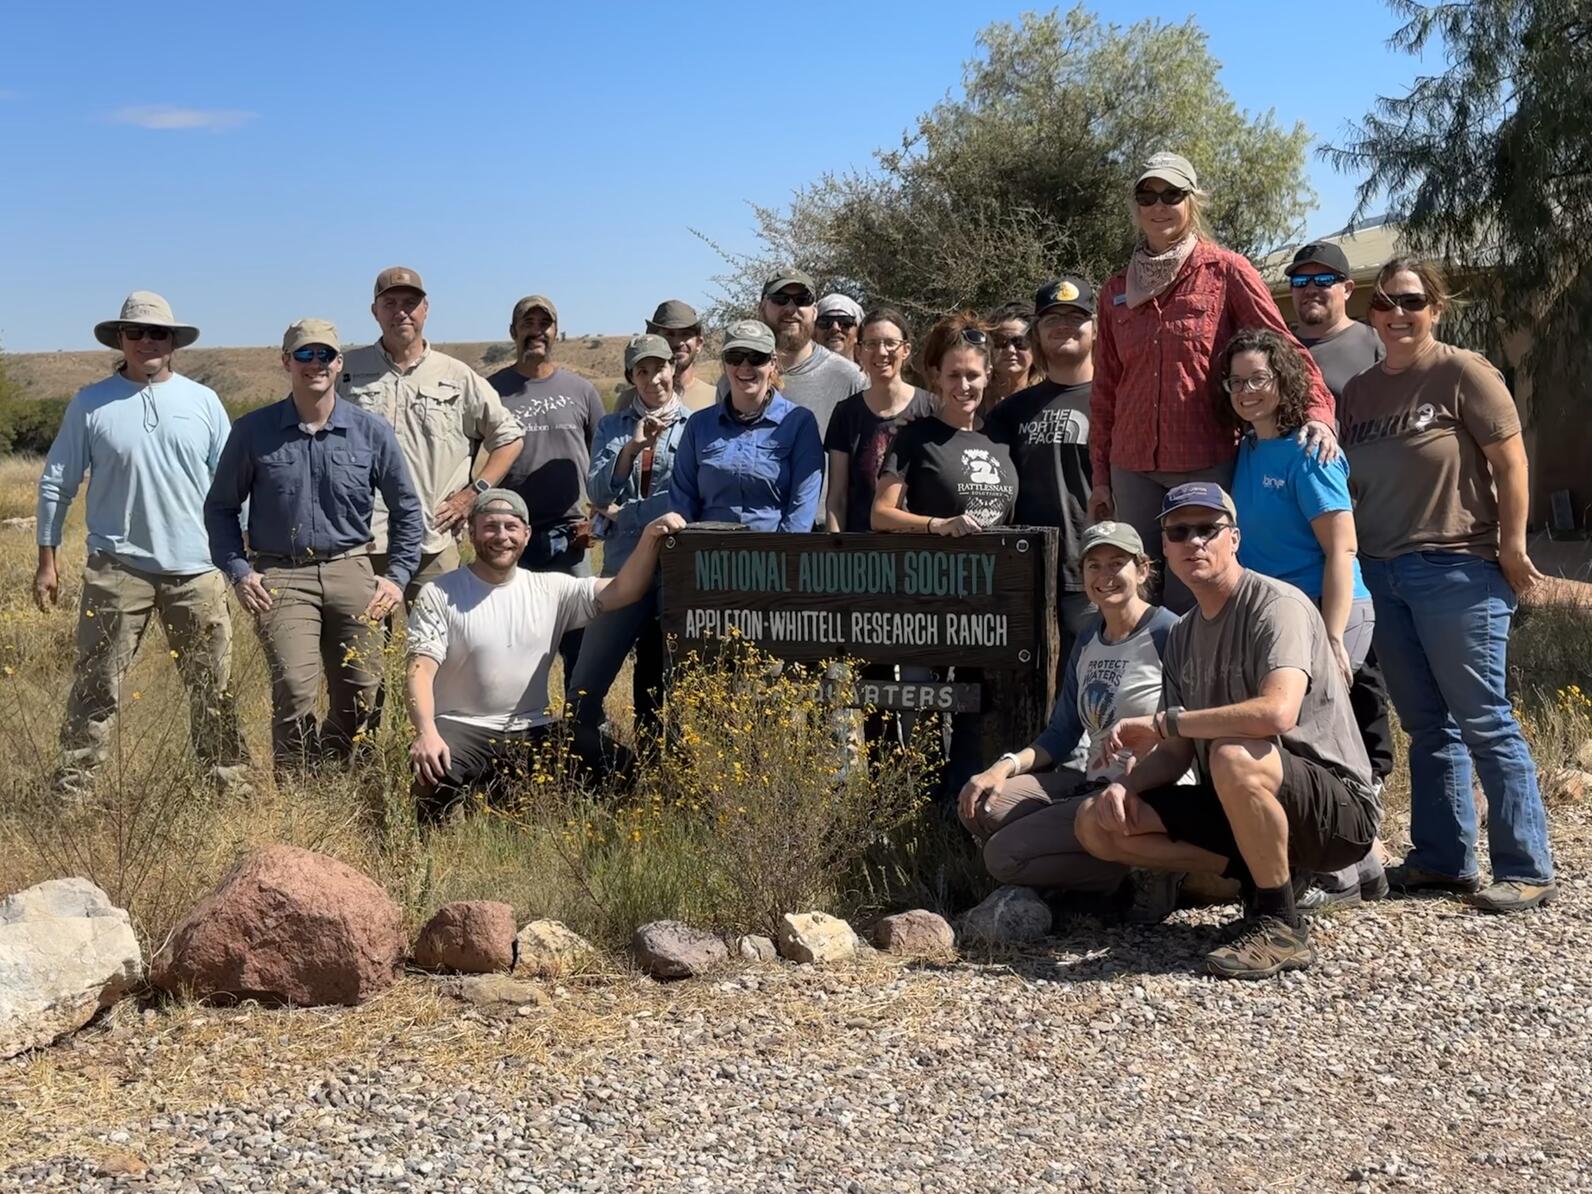 Conservation Workday volunteers gather in front of Research Ranch Headquarters 